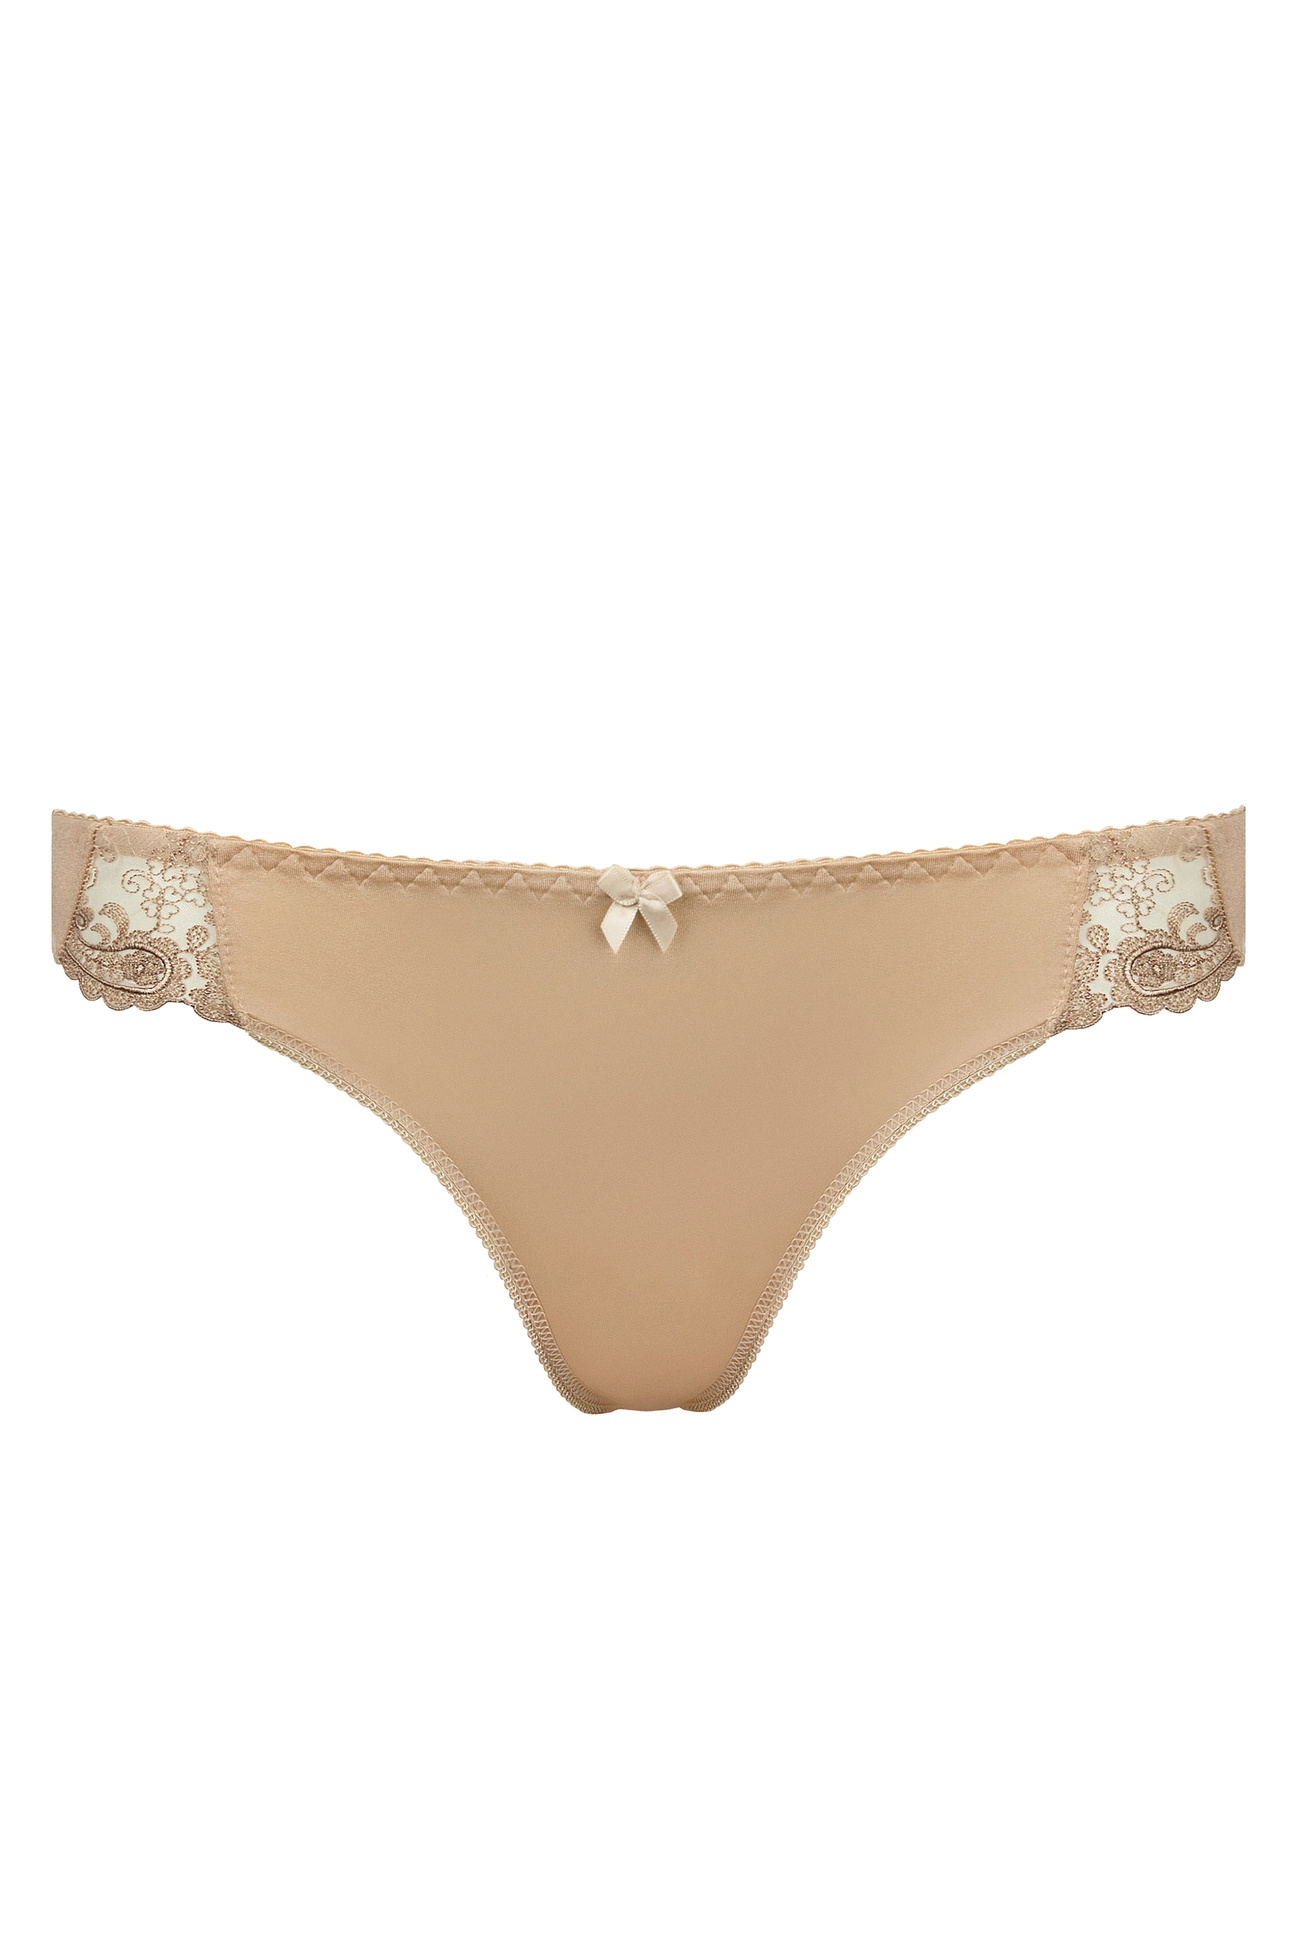 Yvette embroidered thong beige